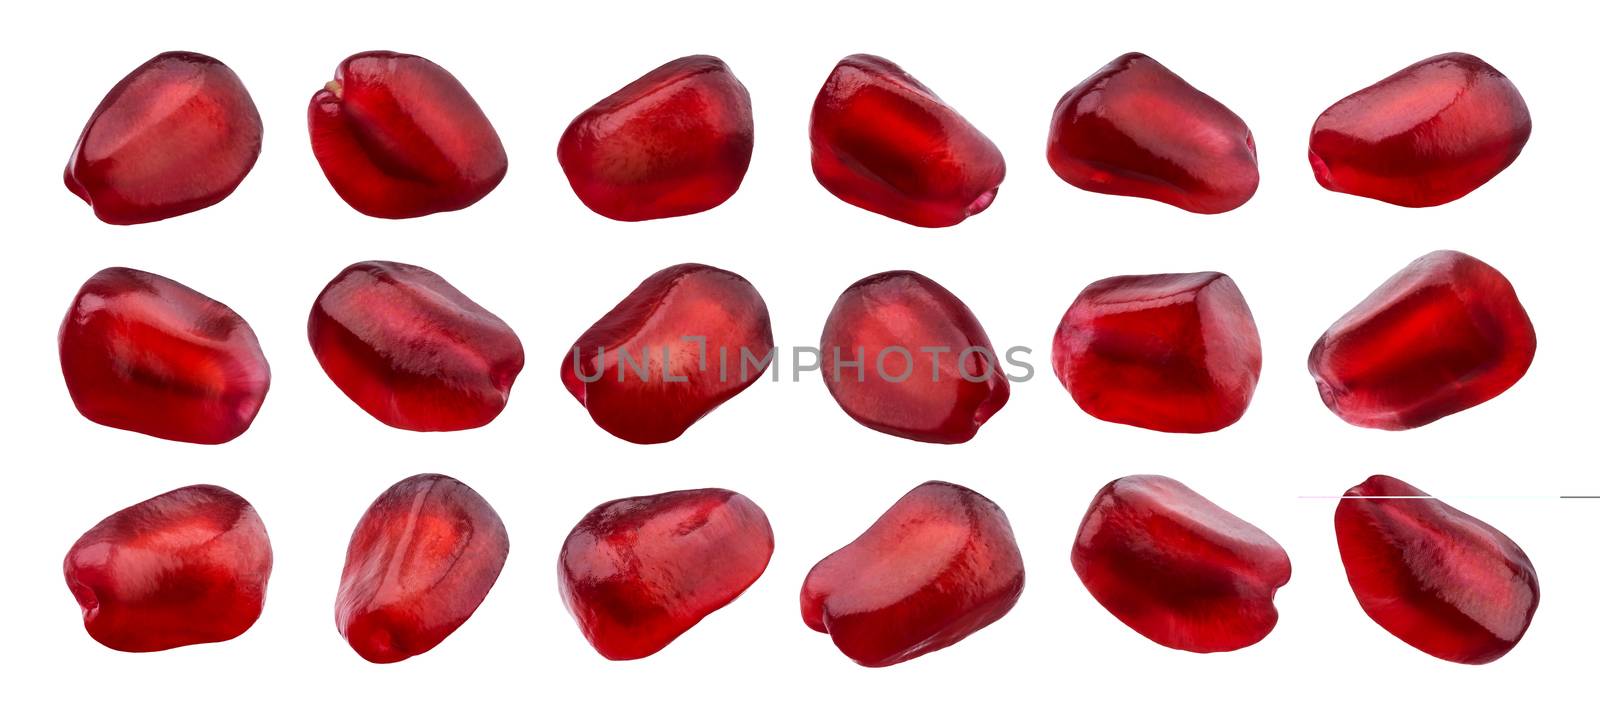 Pomegranate seeds isolated on white background, close-up. Collection by xamtiw